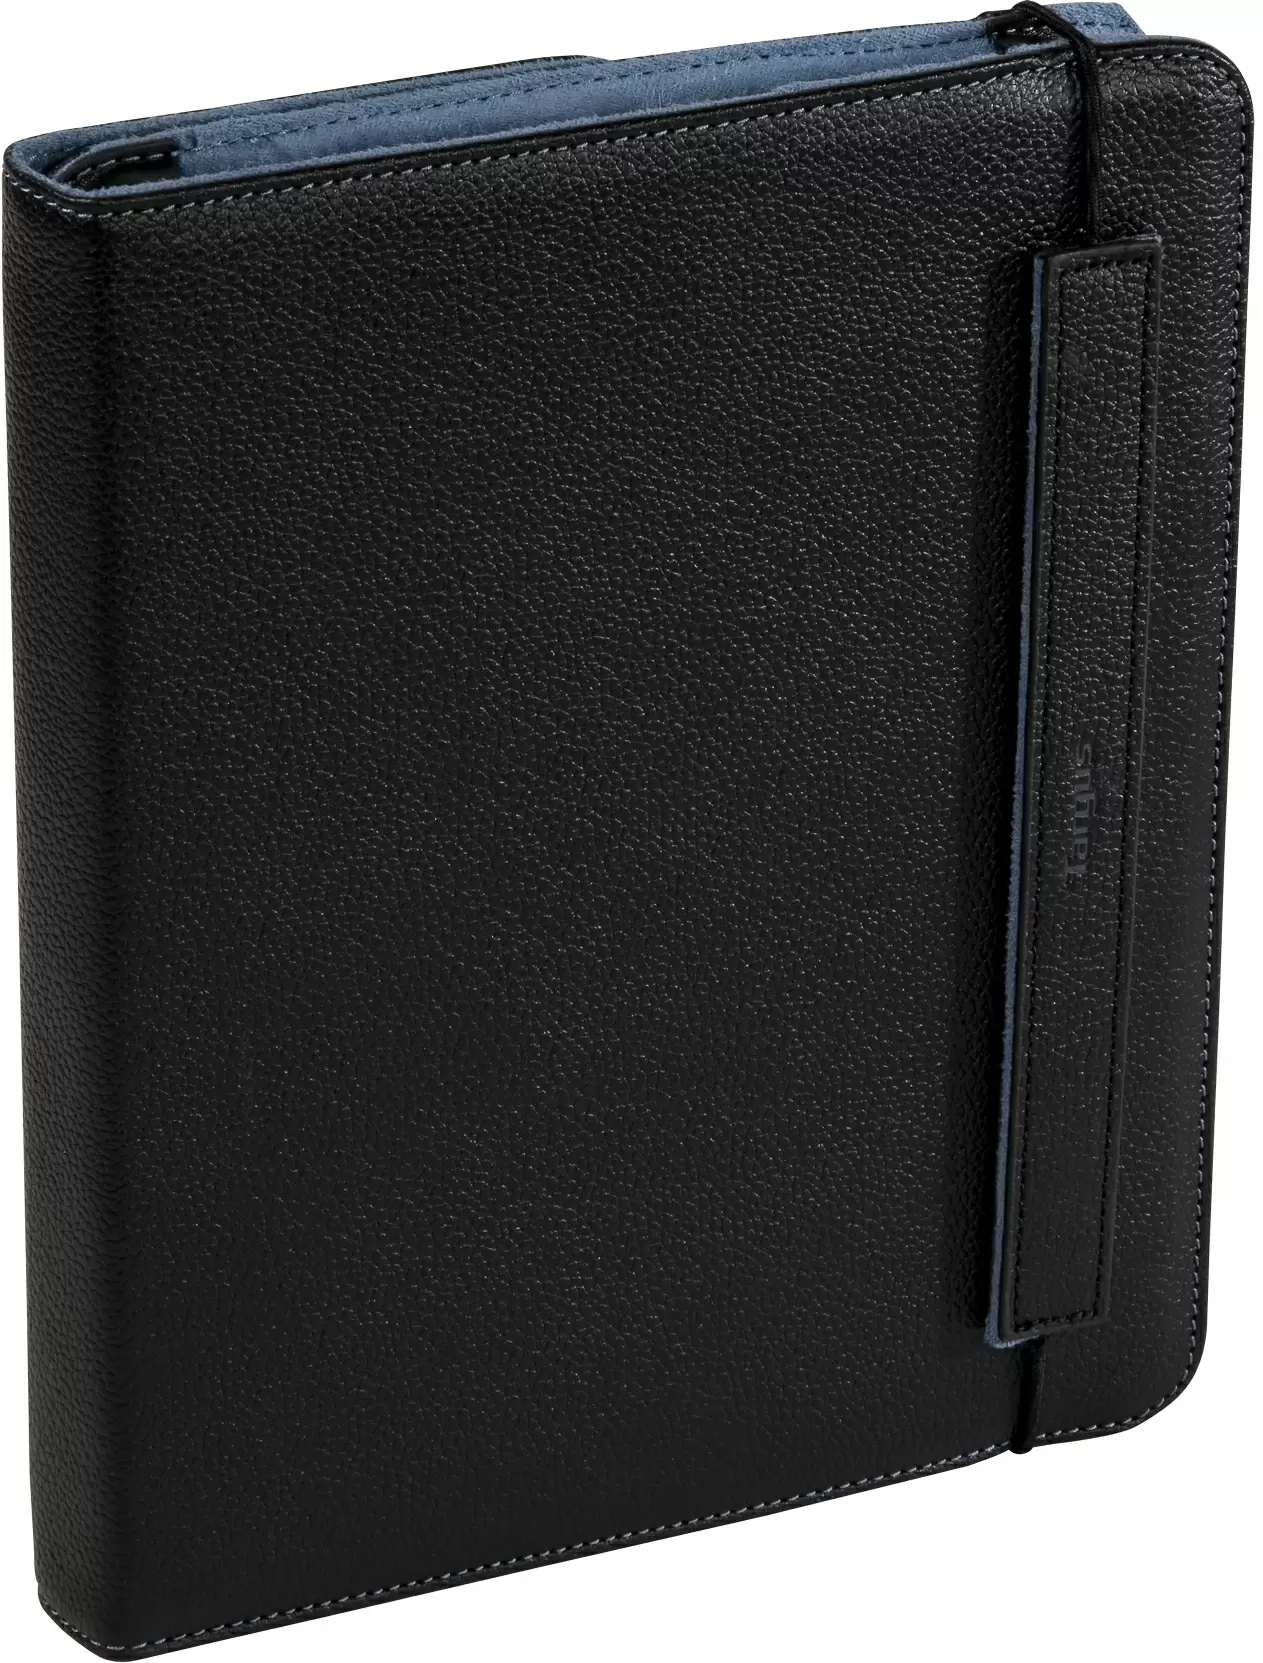 Targus Truss Leather Case & Stand for iPad Price in Pakistan - Updated ...